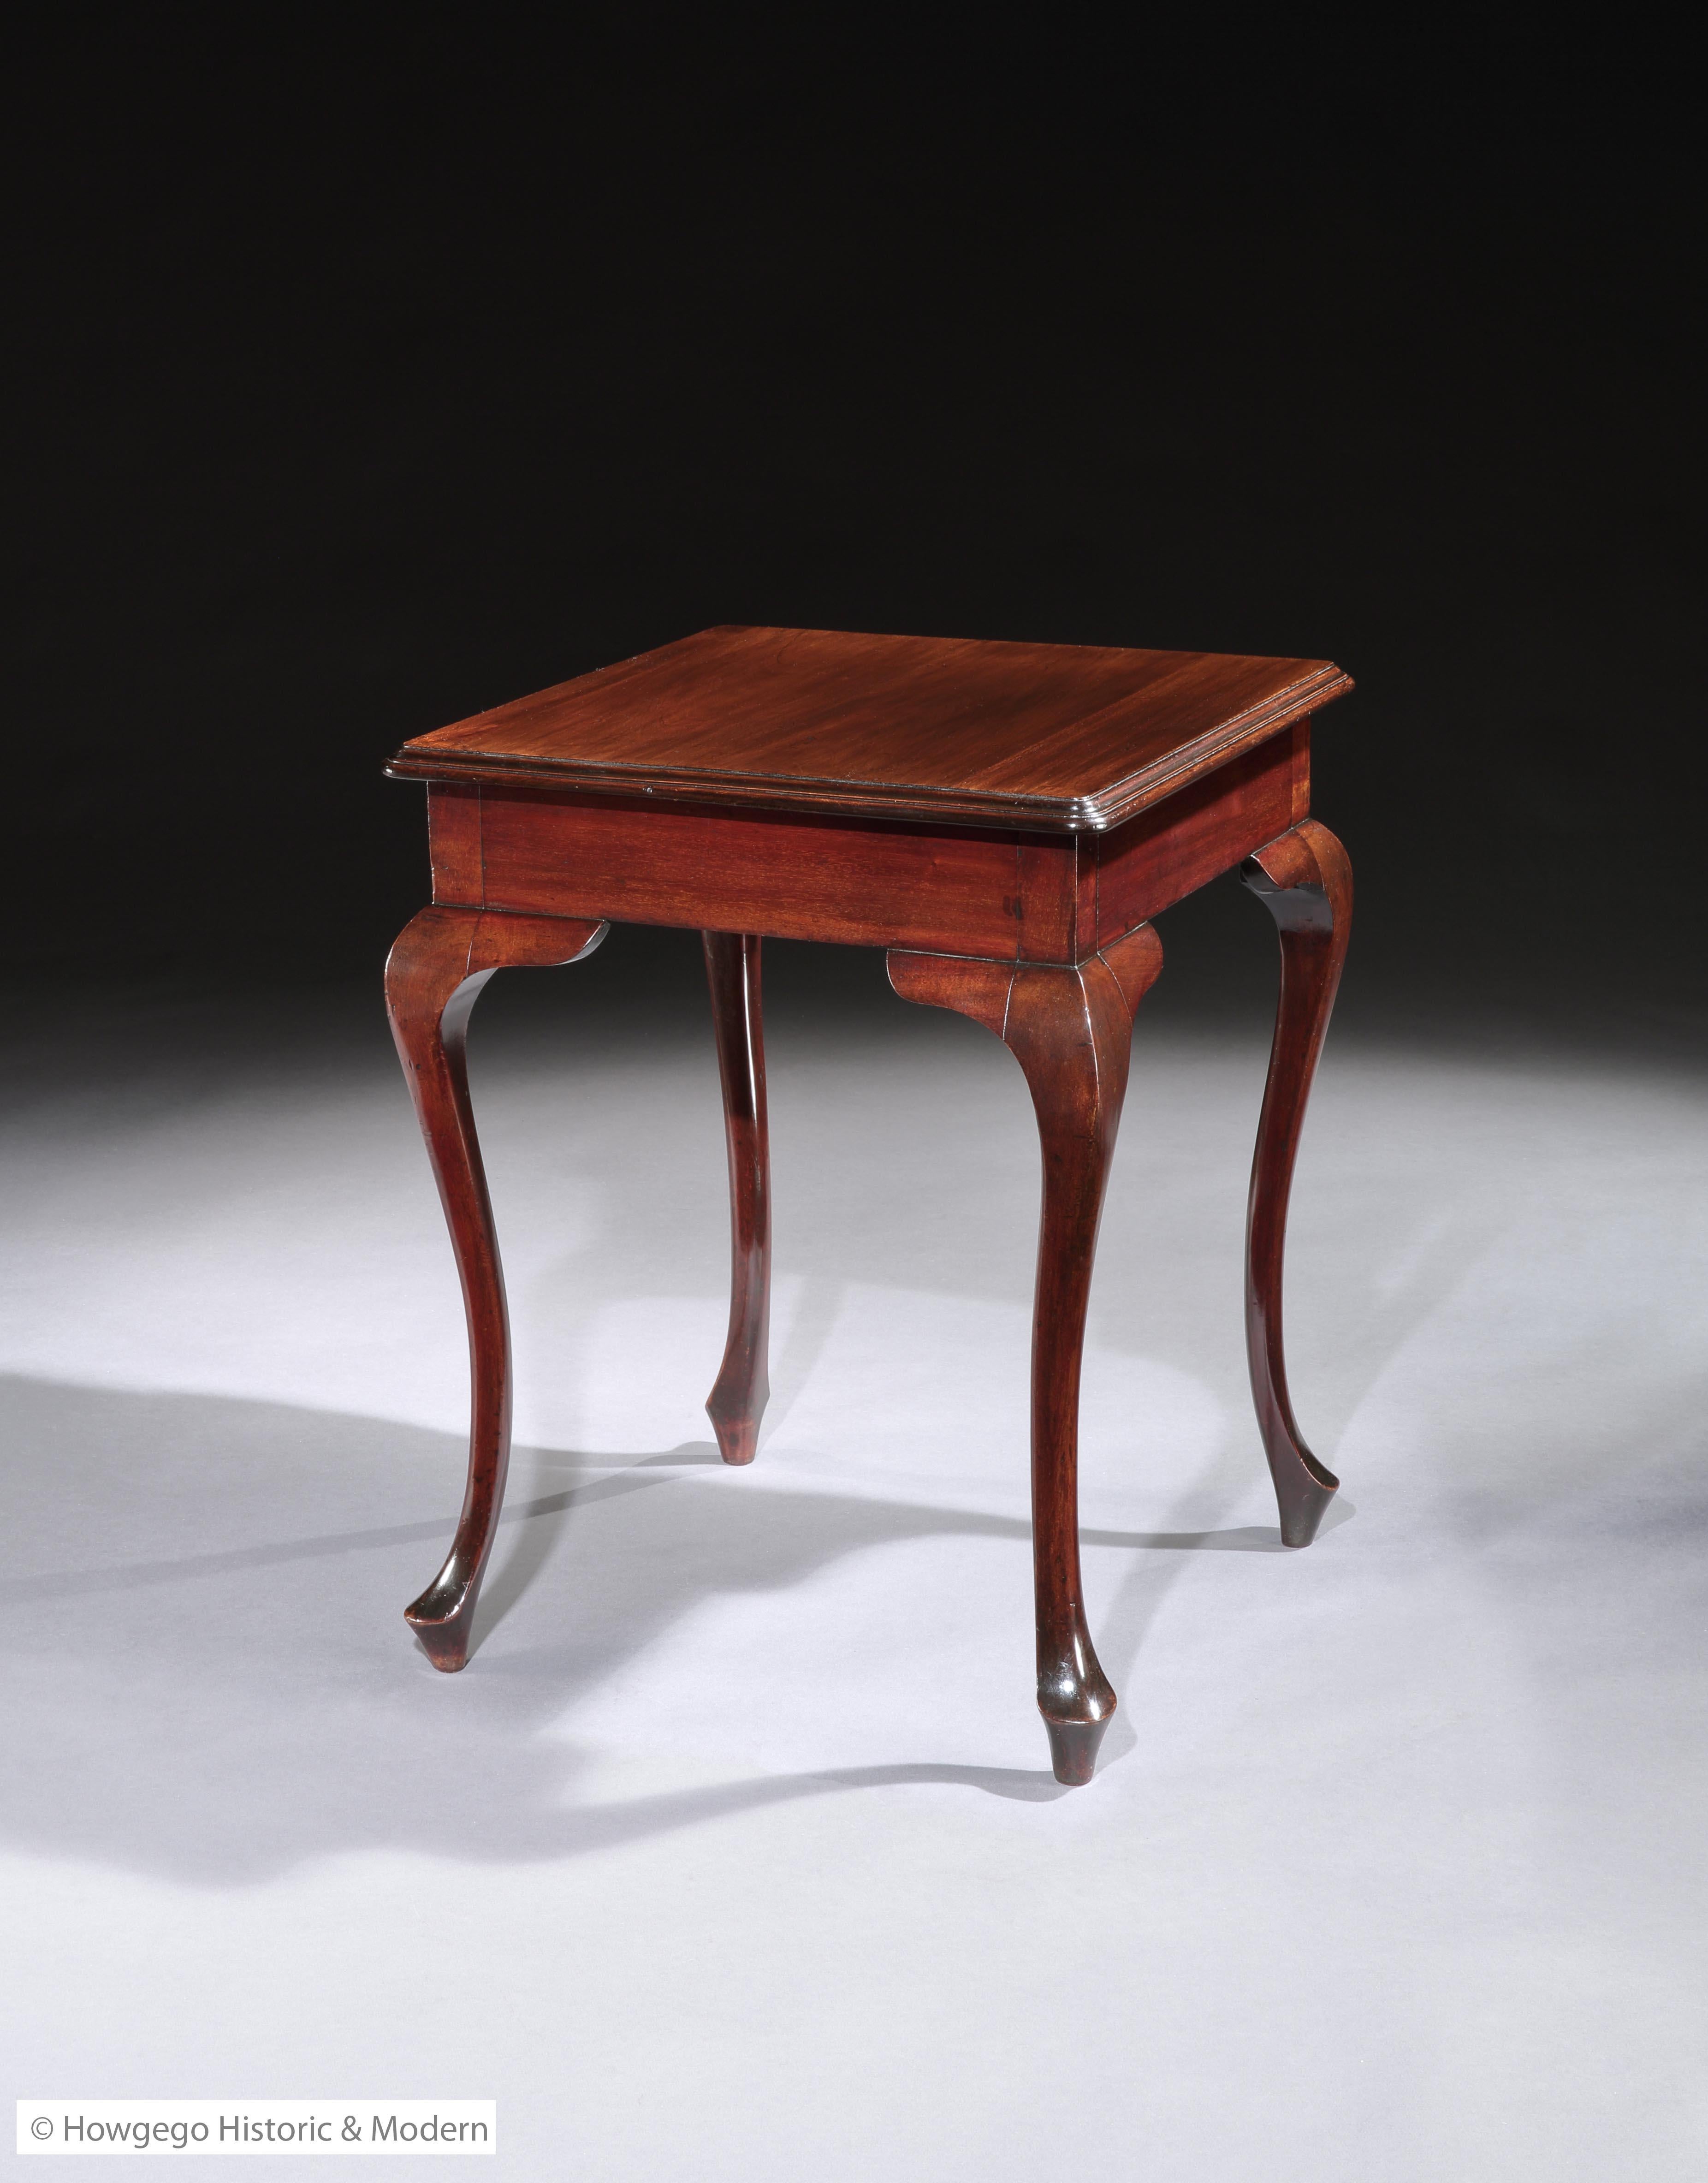 - Unusual Art Deco period mahogany, square-shaped, centre table
- Classic, elegant form with sweeping cabriole legs and angular pad feet
- Pared down detailing to enhance the form
- Finely figured top
- Excellent rich colour and lustrous